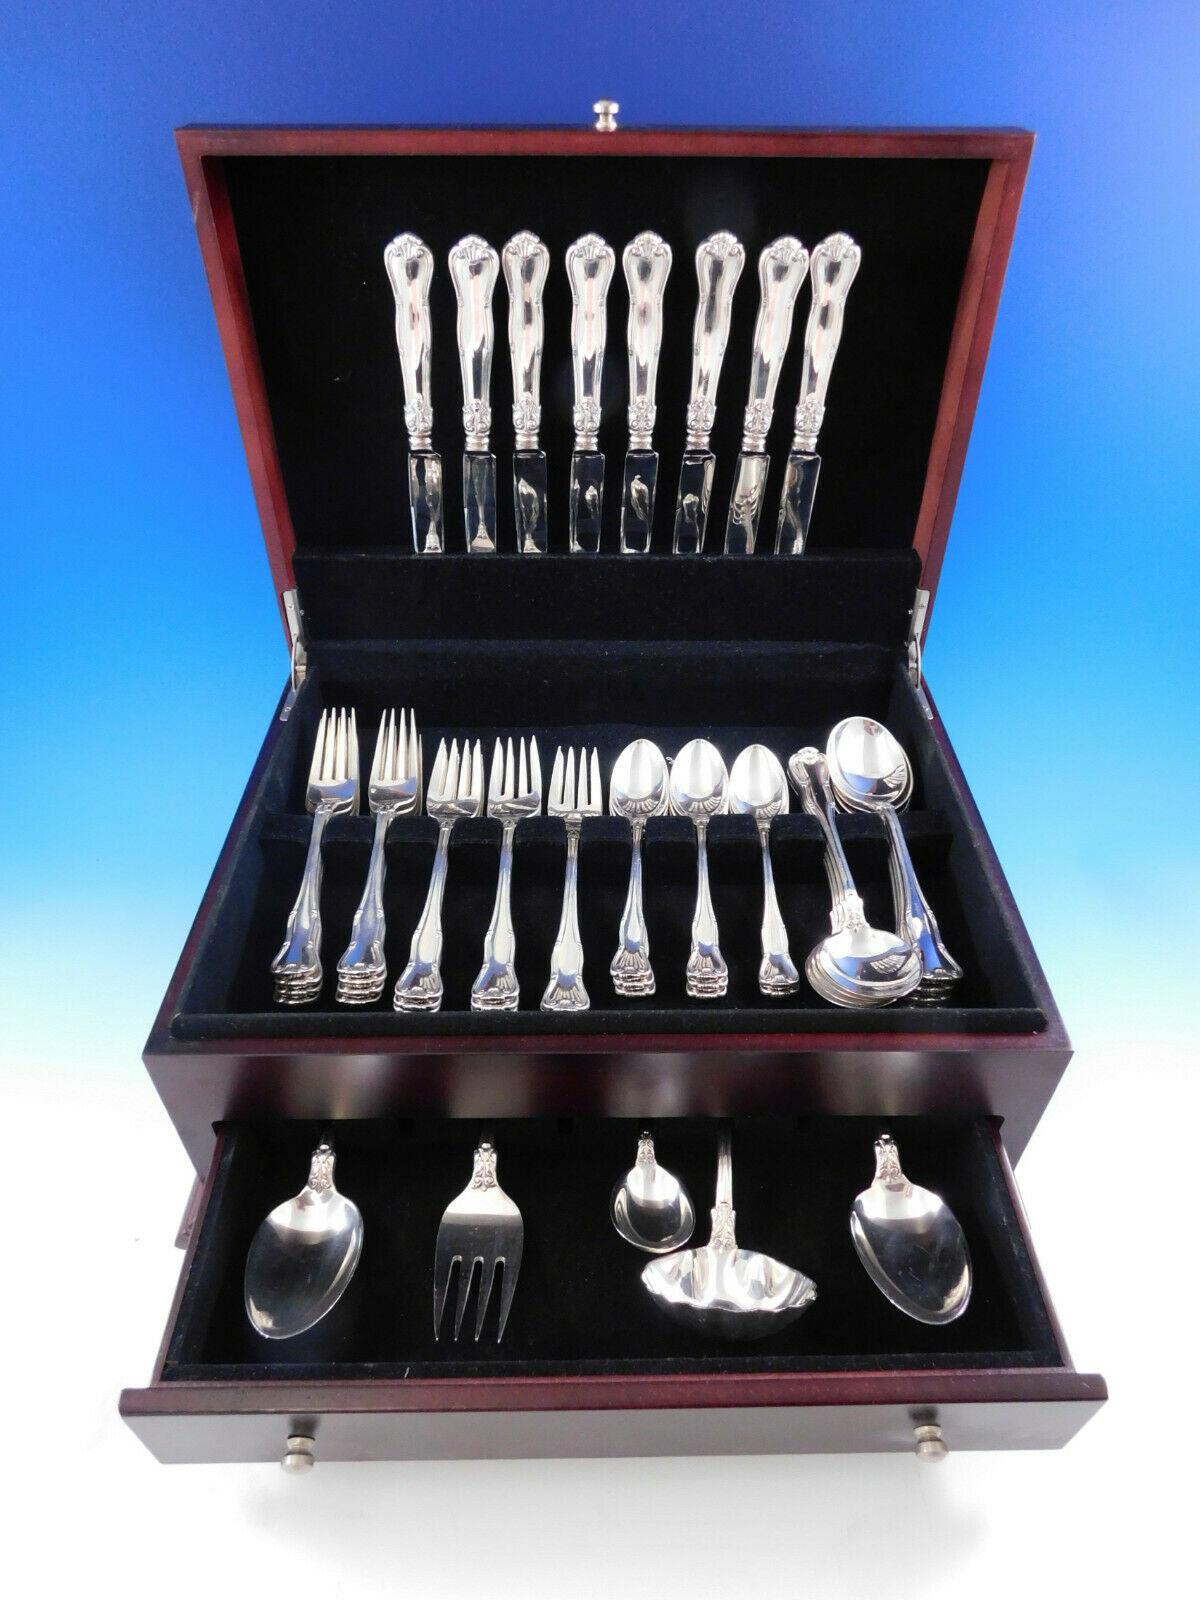 Provence by Tiffany & Co. Sterling silver flatware set - 45 pieces. This set includes:

8 regular knives, 9